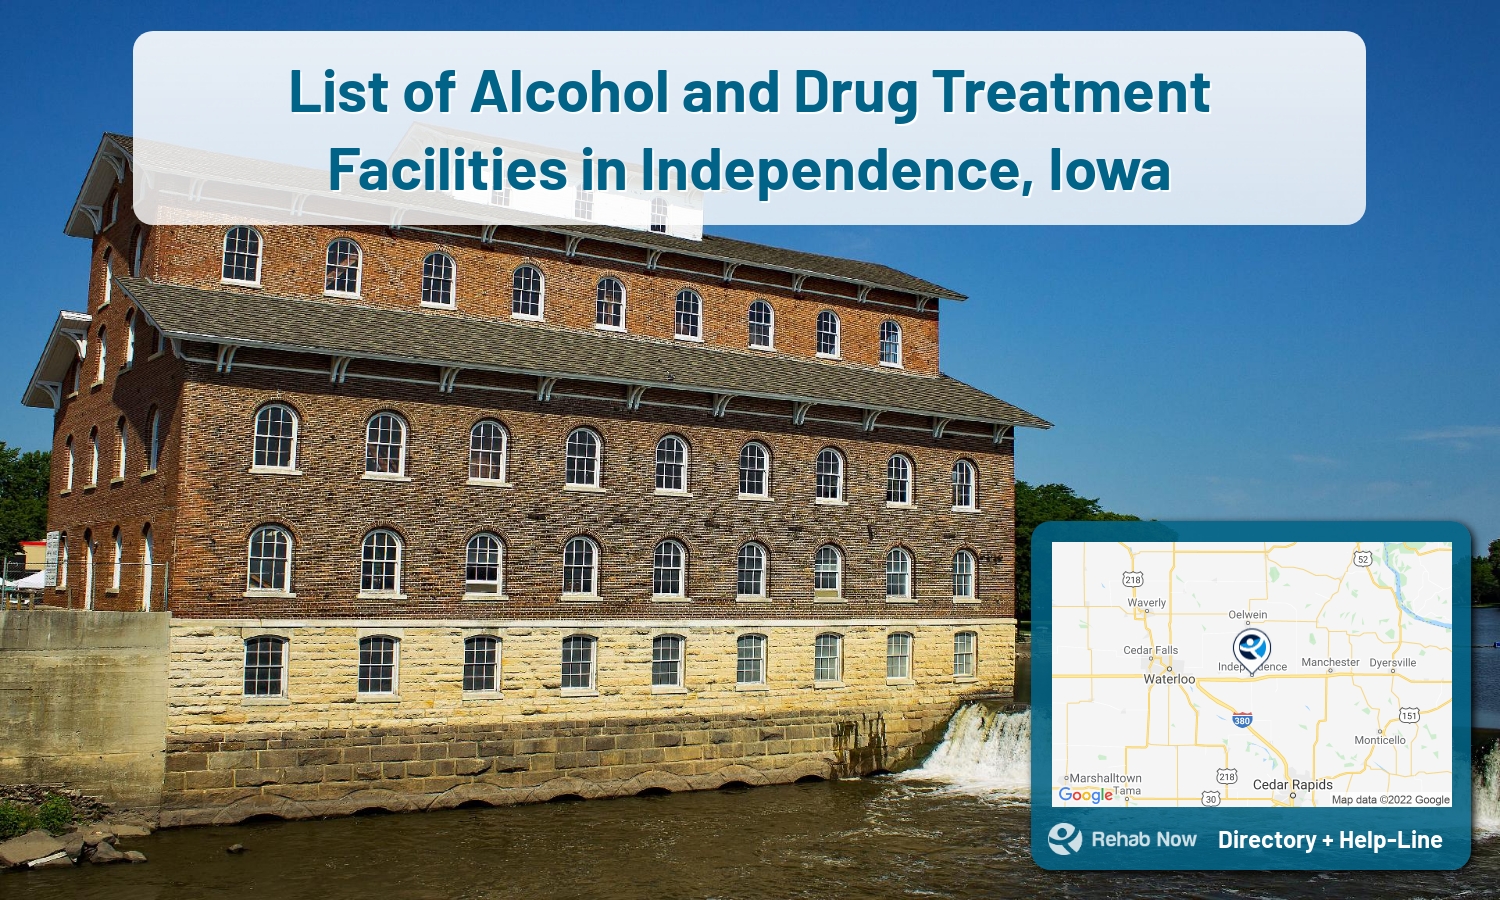 Our experts can help you find treatment now in Independence, Iowa. We list drug rehab and alcohol centers in Iowa.